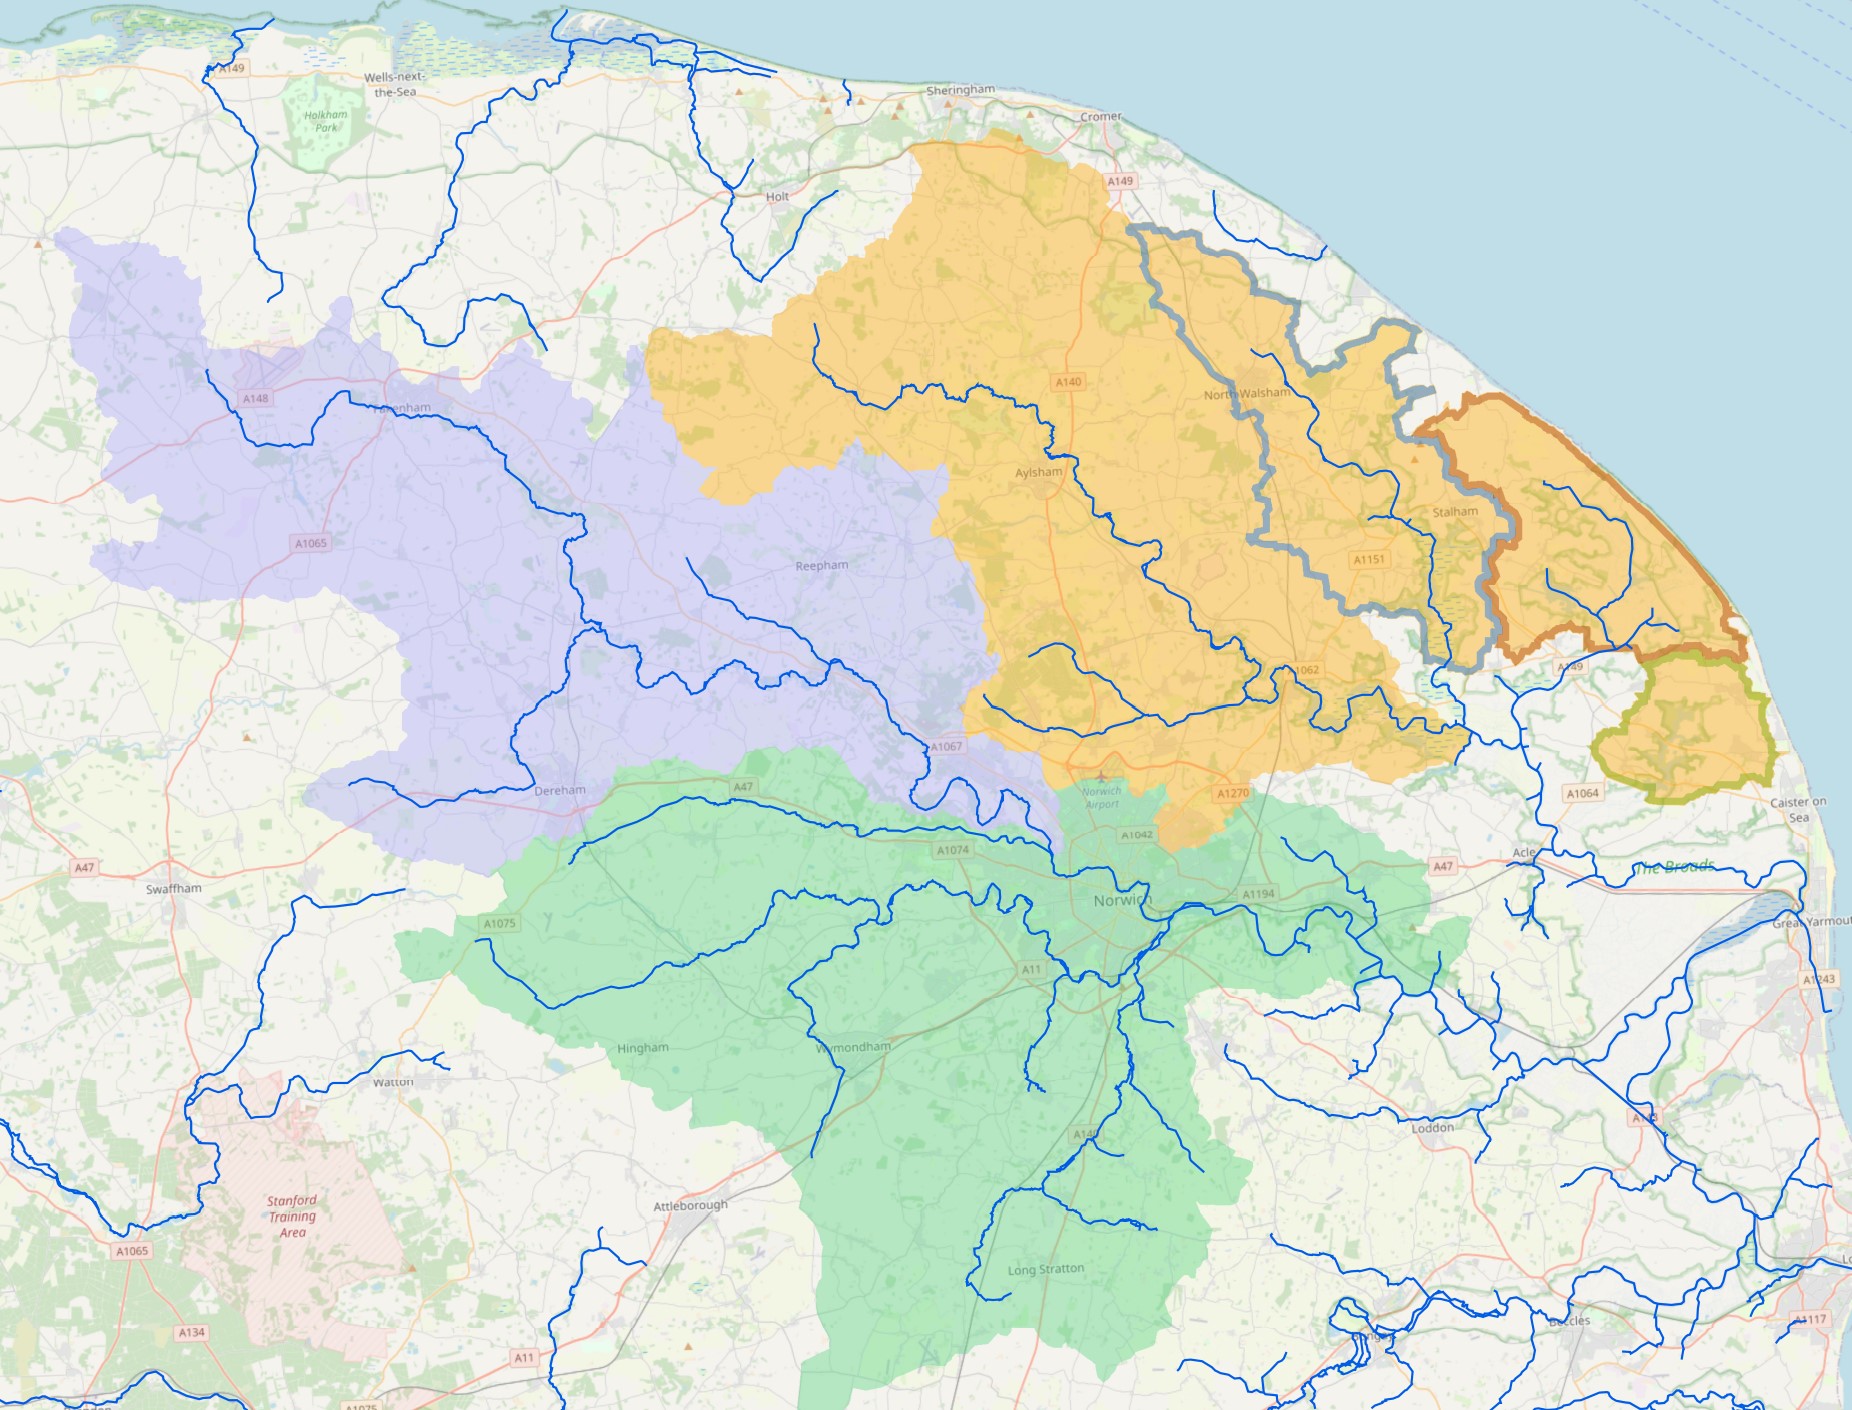 The Norfolk Nutrient Budget Calculator and updated Catchment Maps: One step closer to a solution?